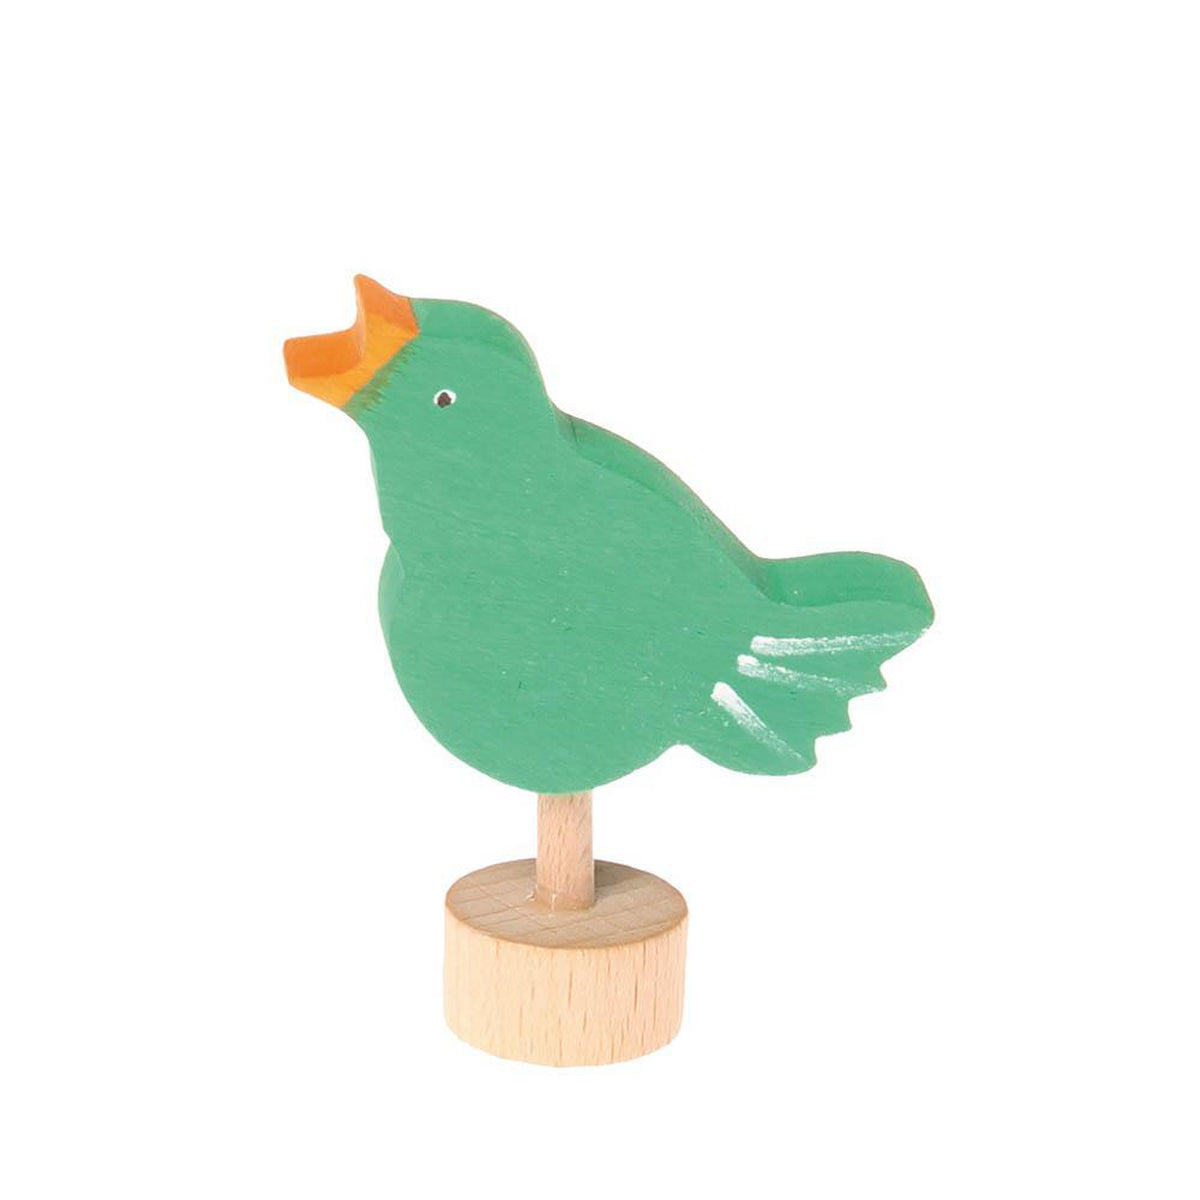 Grimm's birthday ring deco singing bird-decor-Fire the Imagination-Dilly Dally Kids